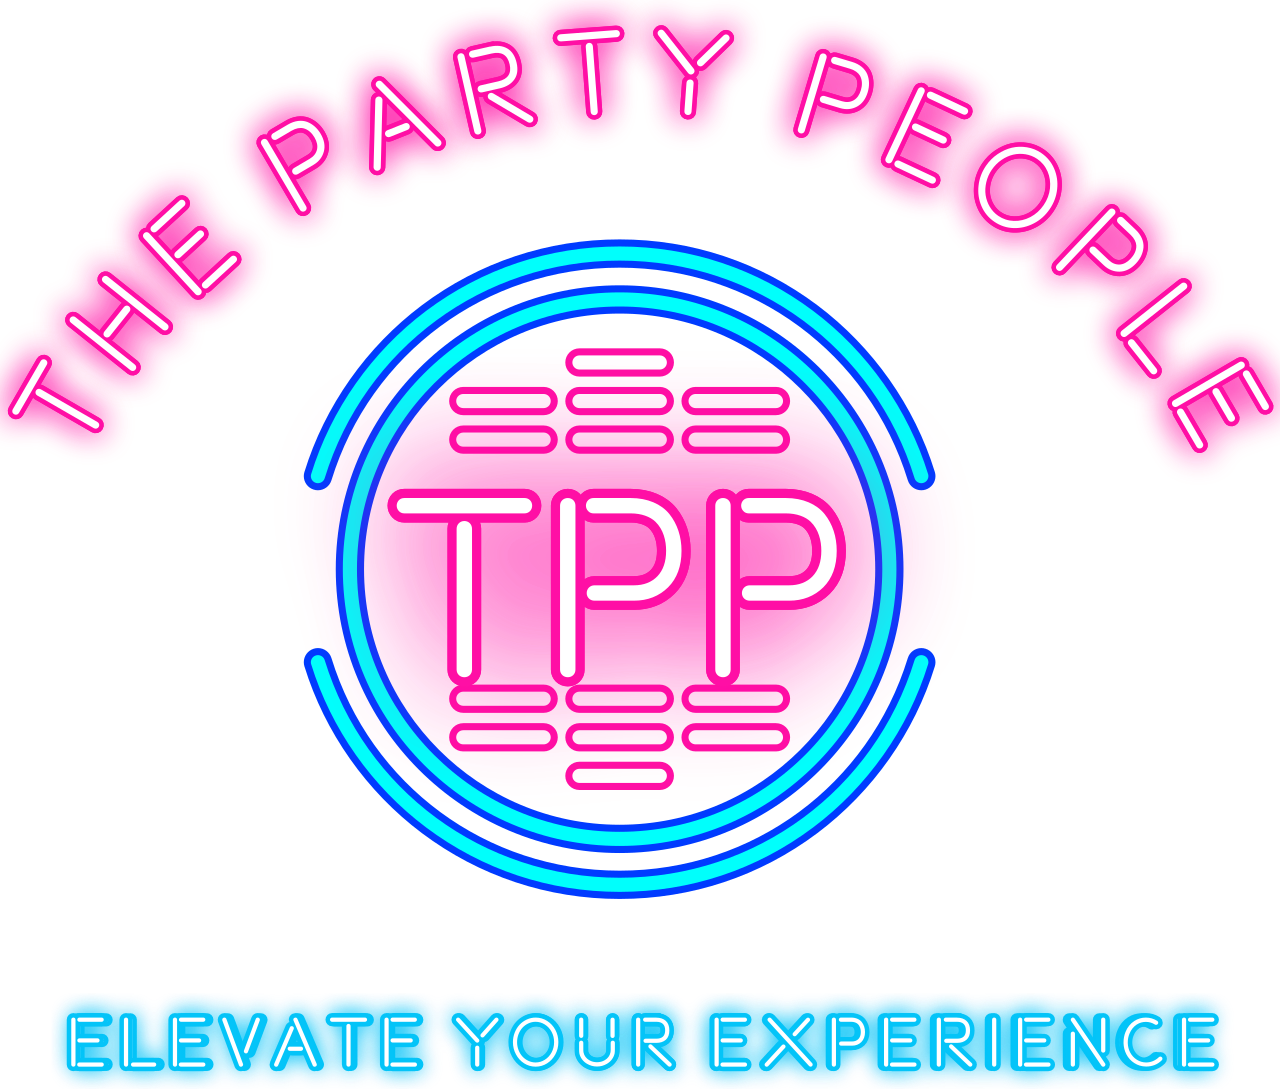 THE PARTY PEOPLE's logo